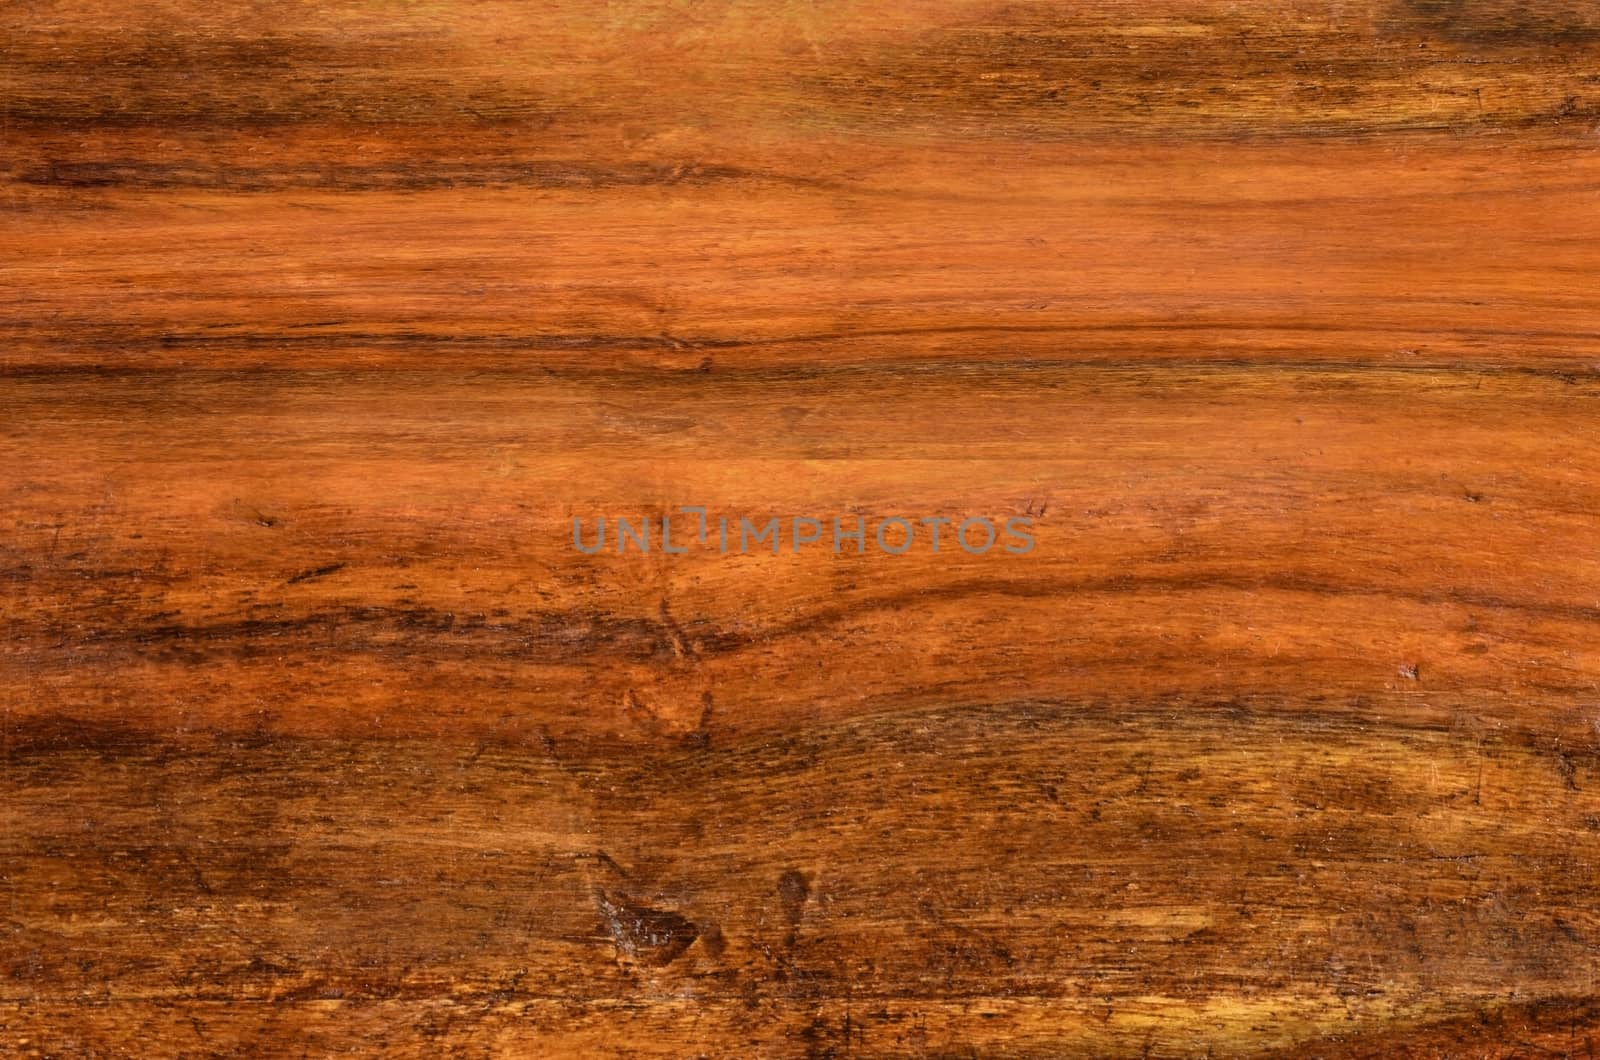 Hardwood from indian rainforest, used for furniture construction.